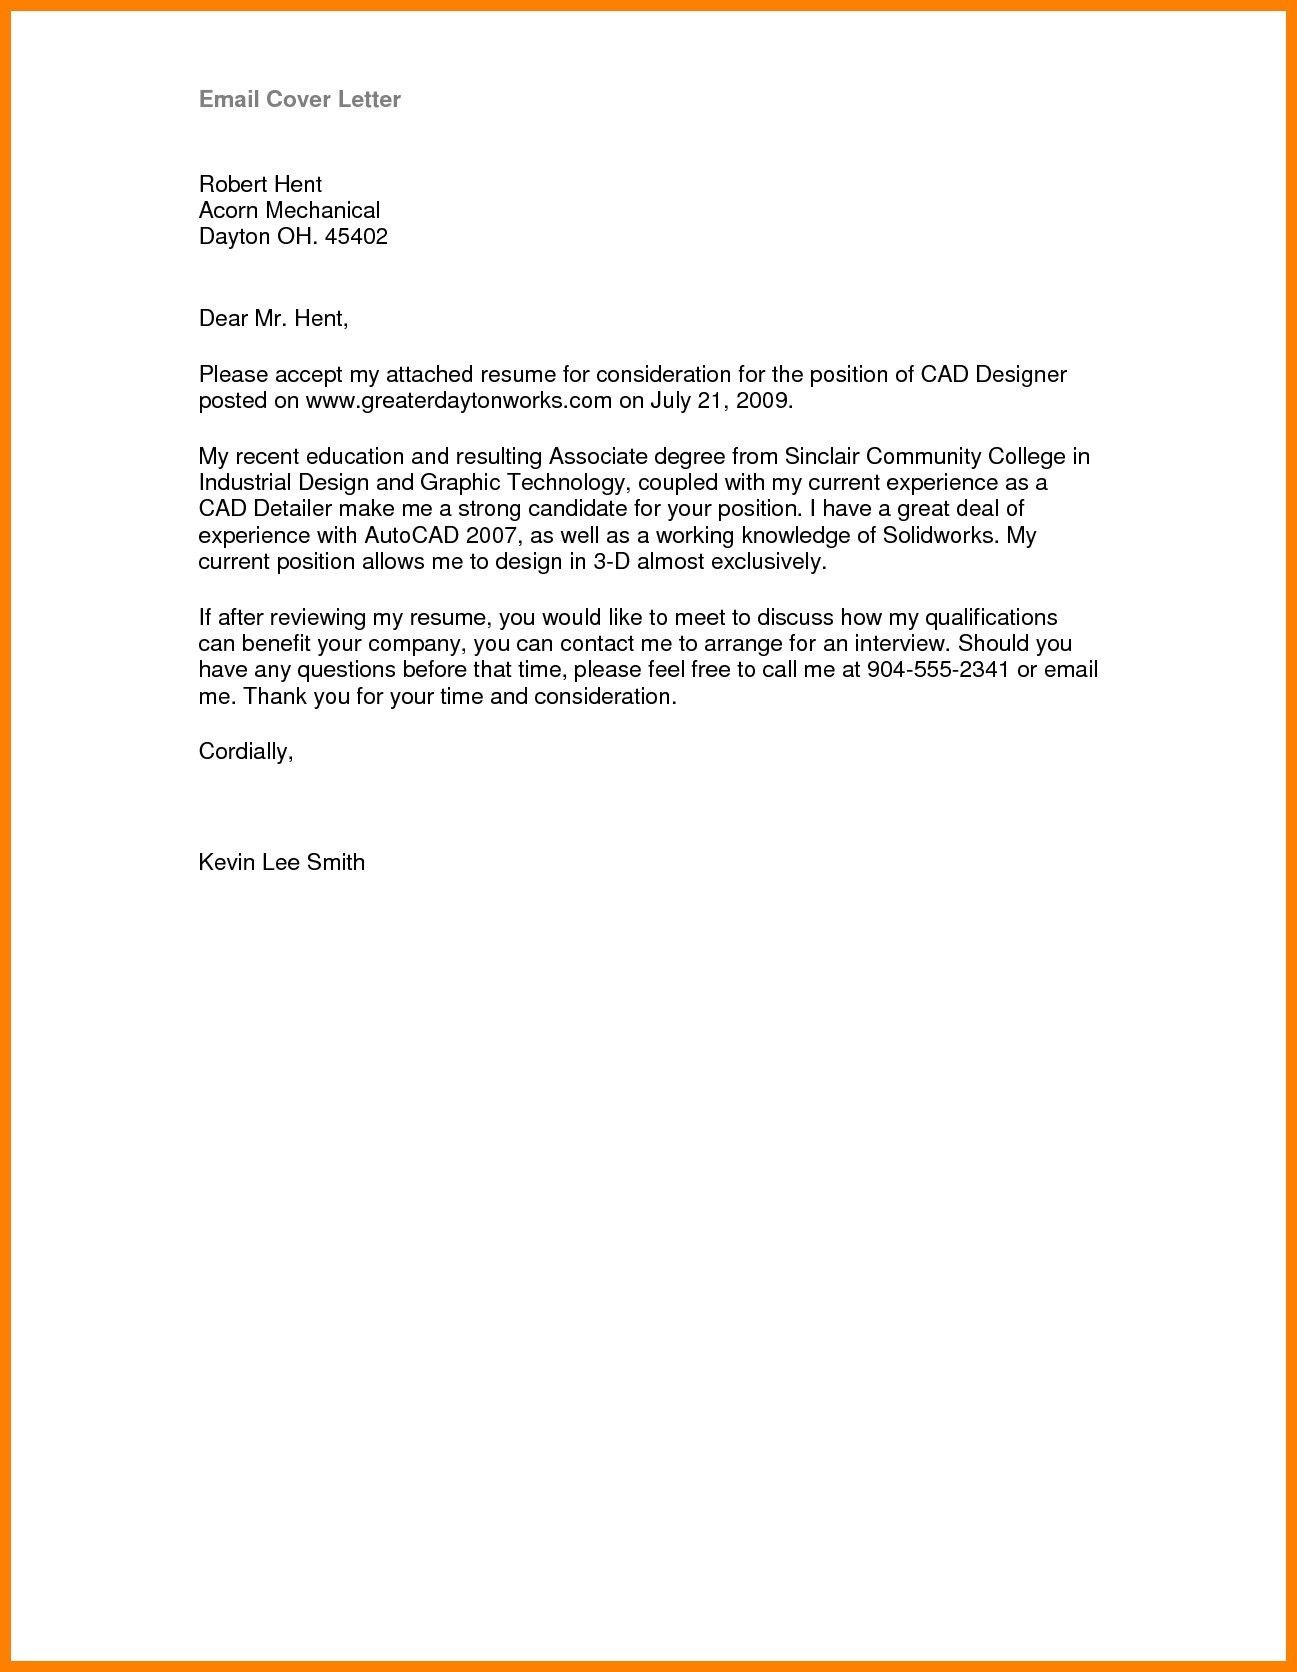 Email with Cover Letter and Resume attached Sample 25lancarrezekiq Email Cover Letter Sample . Email Cover Letter Sample Cover …